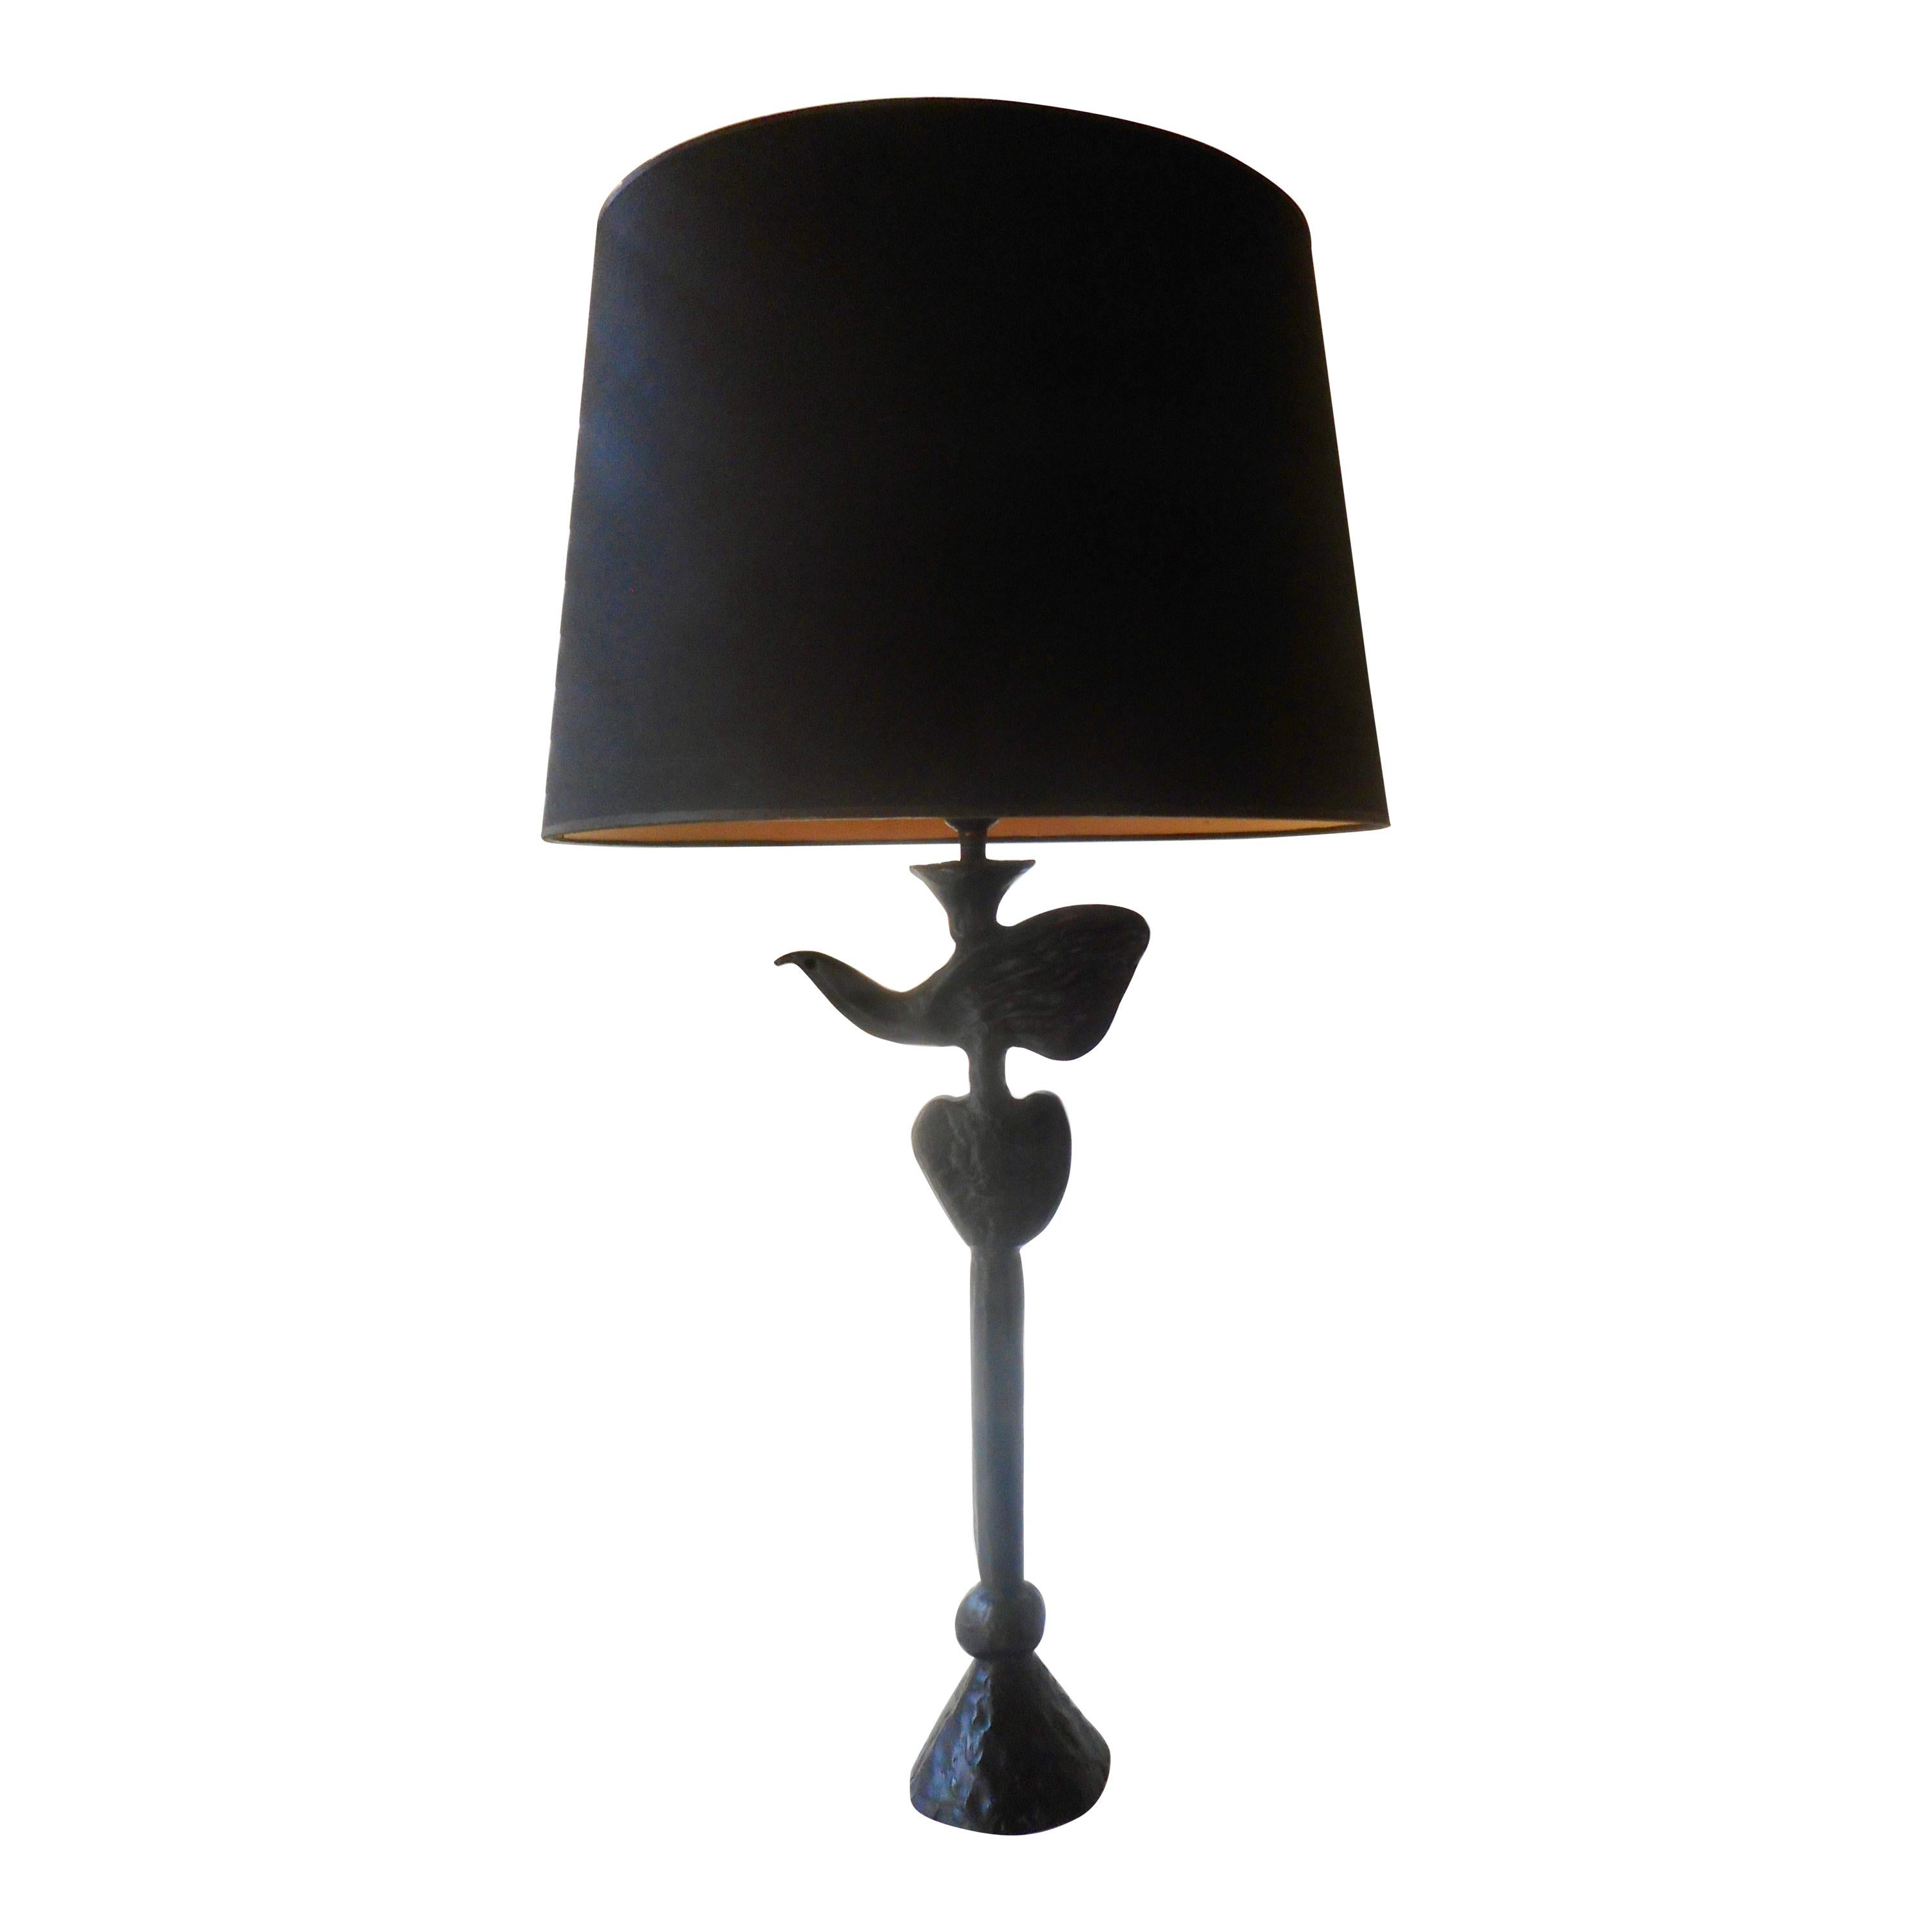 Blackened Bronze Lamp by Pierre Casenove for Fondica, France, 1990 For Sale